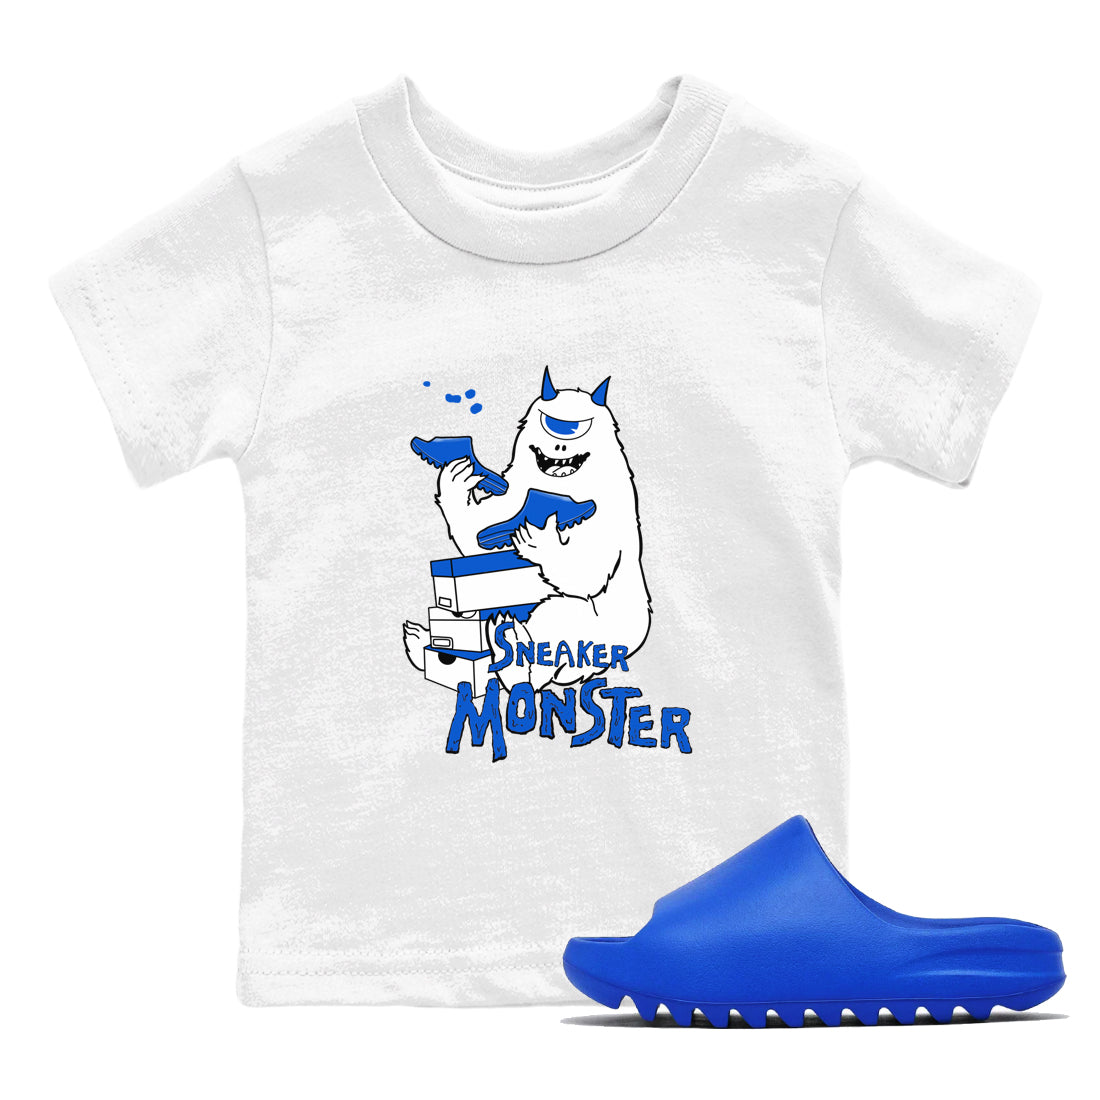 Yeezy Slide Azure shirts to match jordans Sneaker Monster sneaker match tees Yeezy Slide Azure SNRT Sneaker Tees streetwear brand Baby and Youth White 1 cotton tee